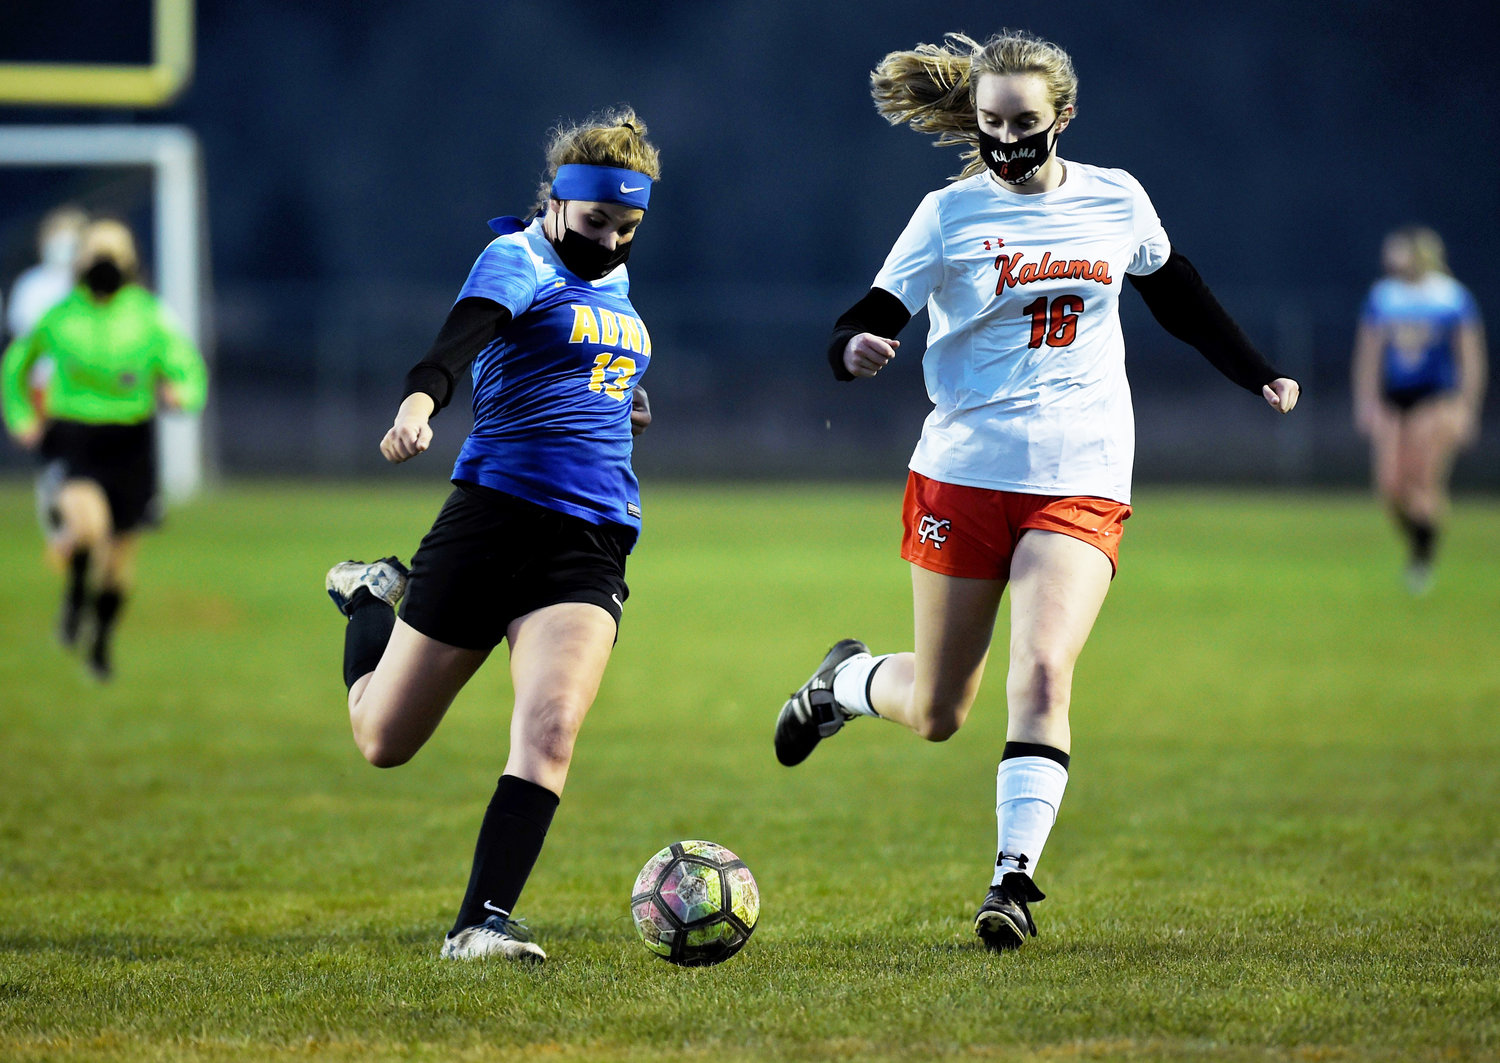 Adna's Gracie Beaulieu (13) goes for a shot against a Kalama defender on Tuesday.